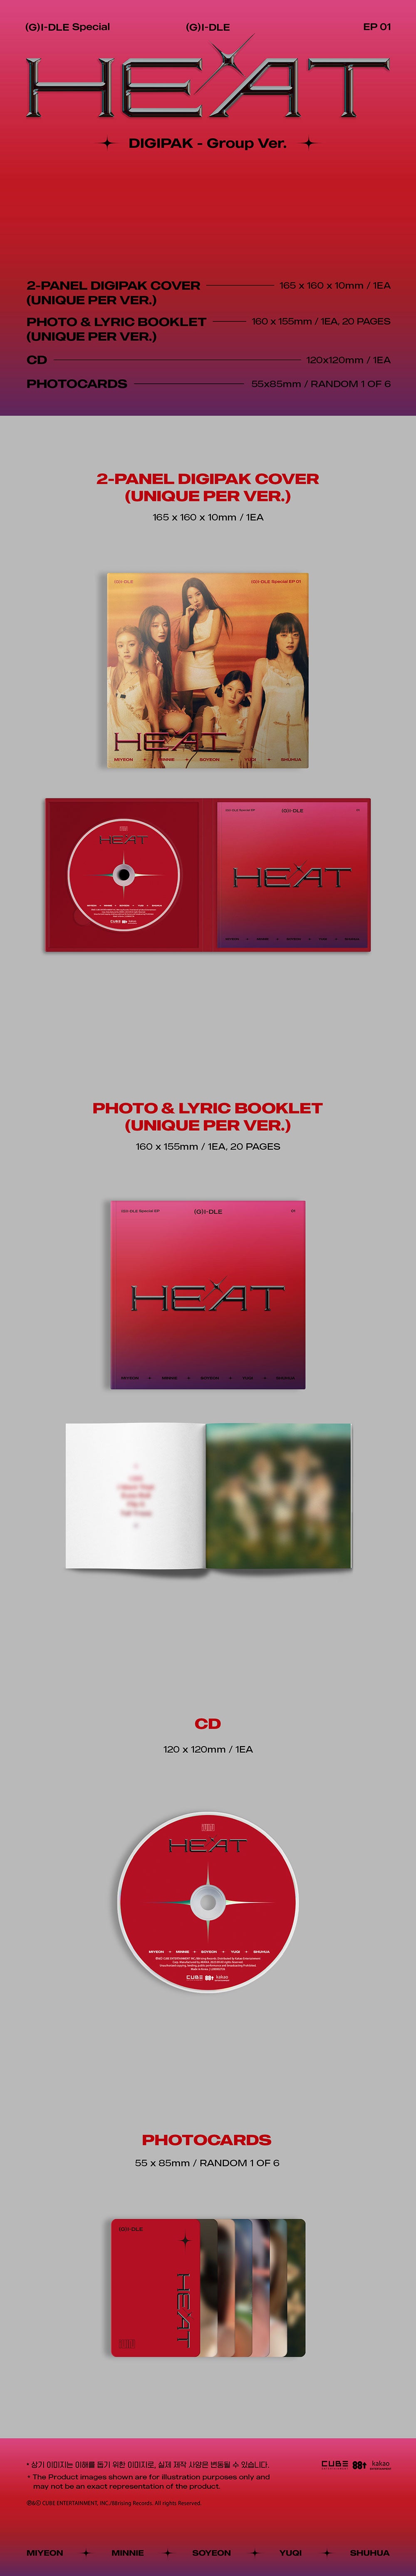 (G)I-DLE - HEAT (Special EP 01) Digipak - Group Ver.